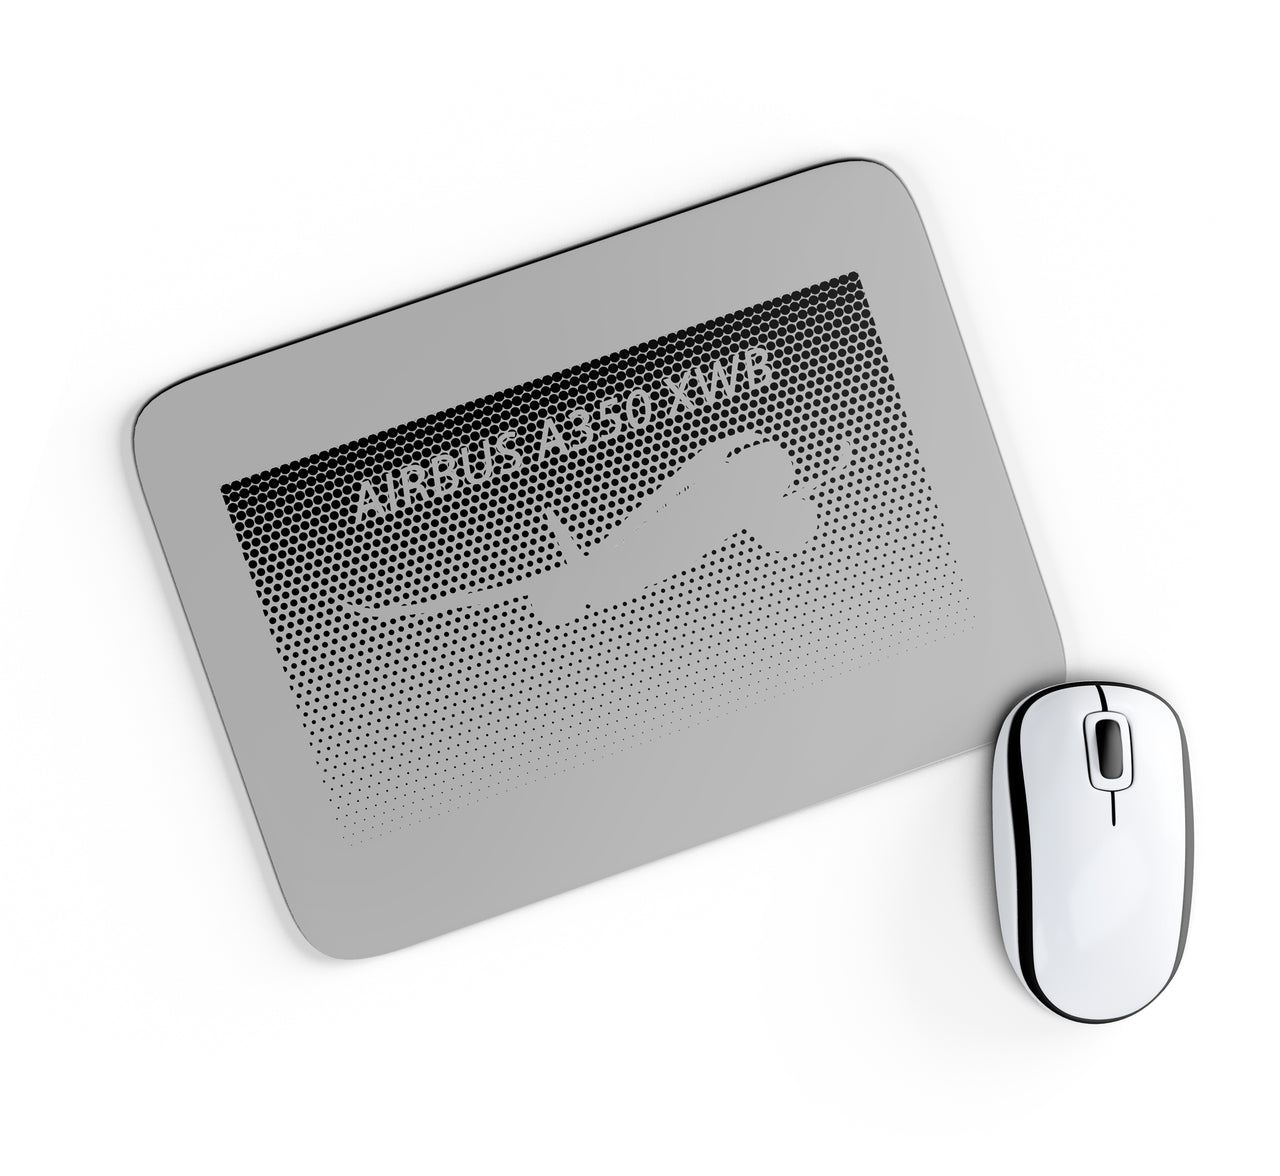 Airbus A350XWB & Dots Designed Mouse Pads